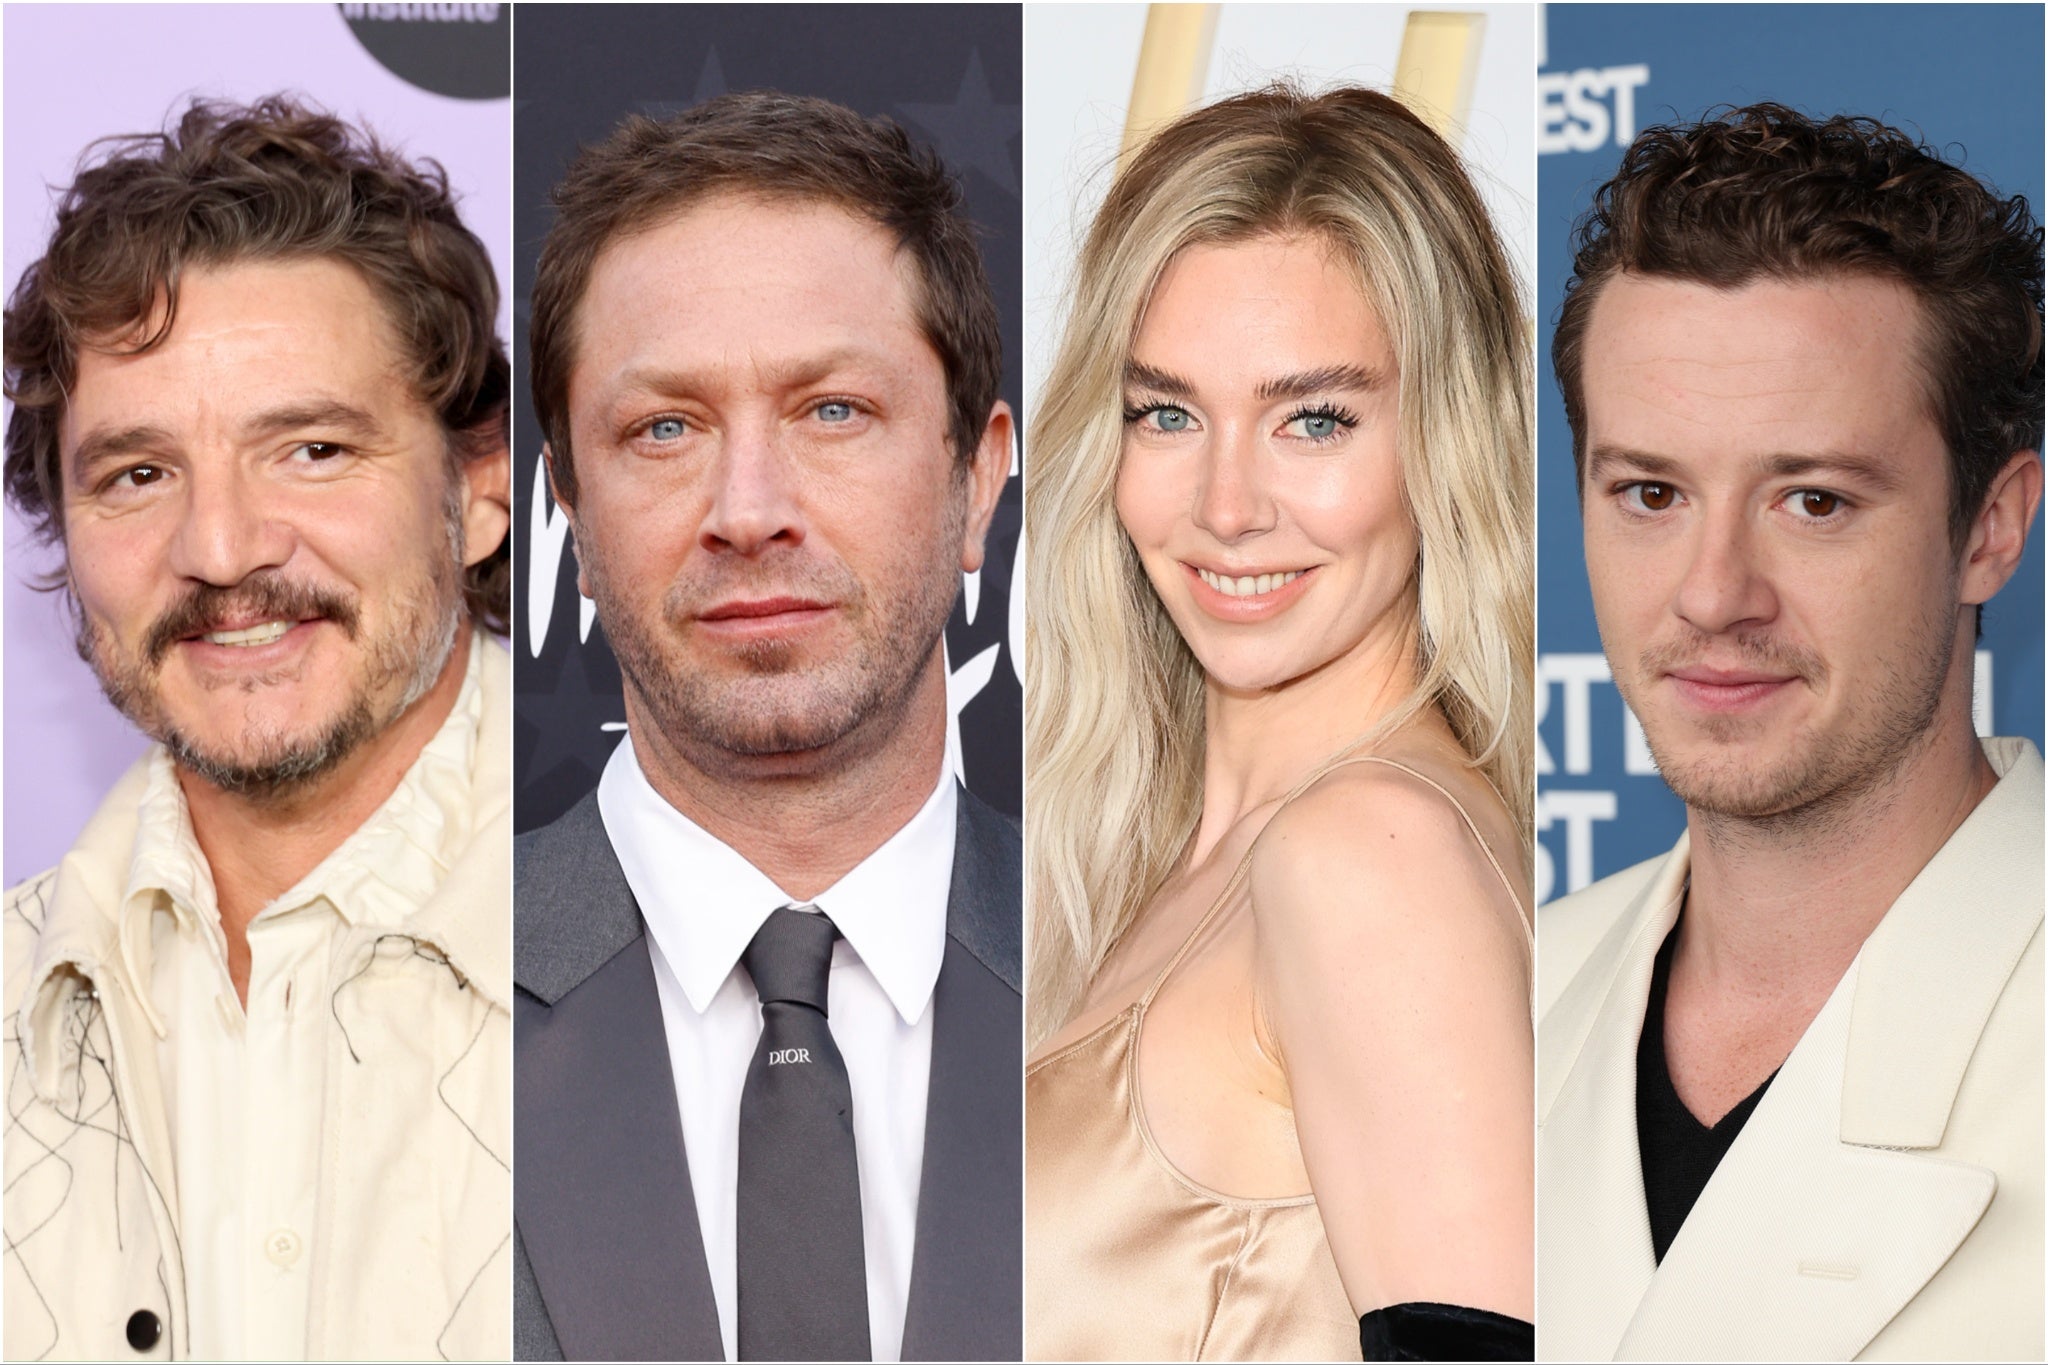 Pedro Pascal, Ebon Moss-Bachrach, Vanessa Kirby and Joseph Quinn will also star in the movie